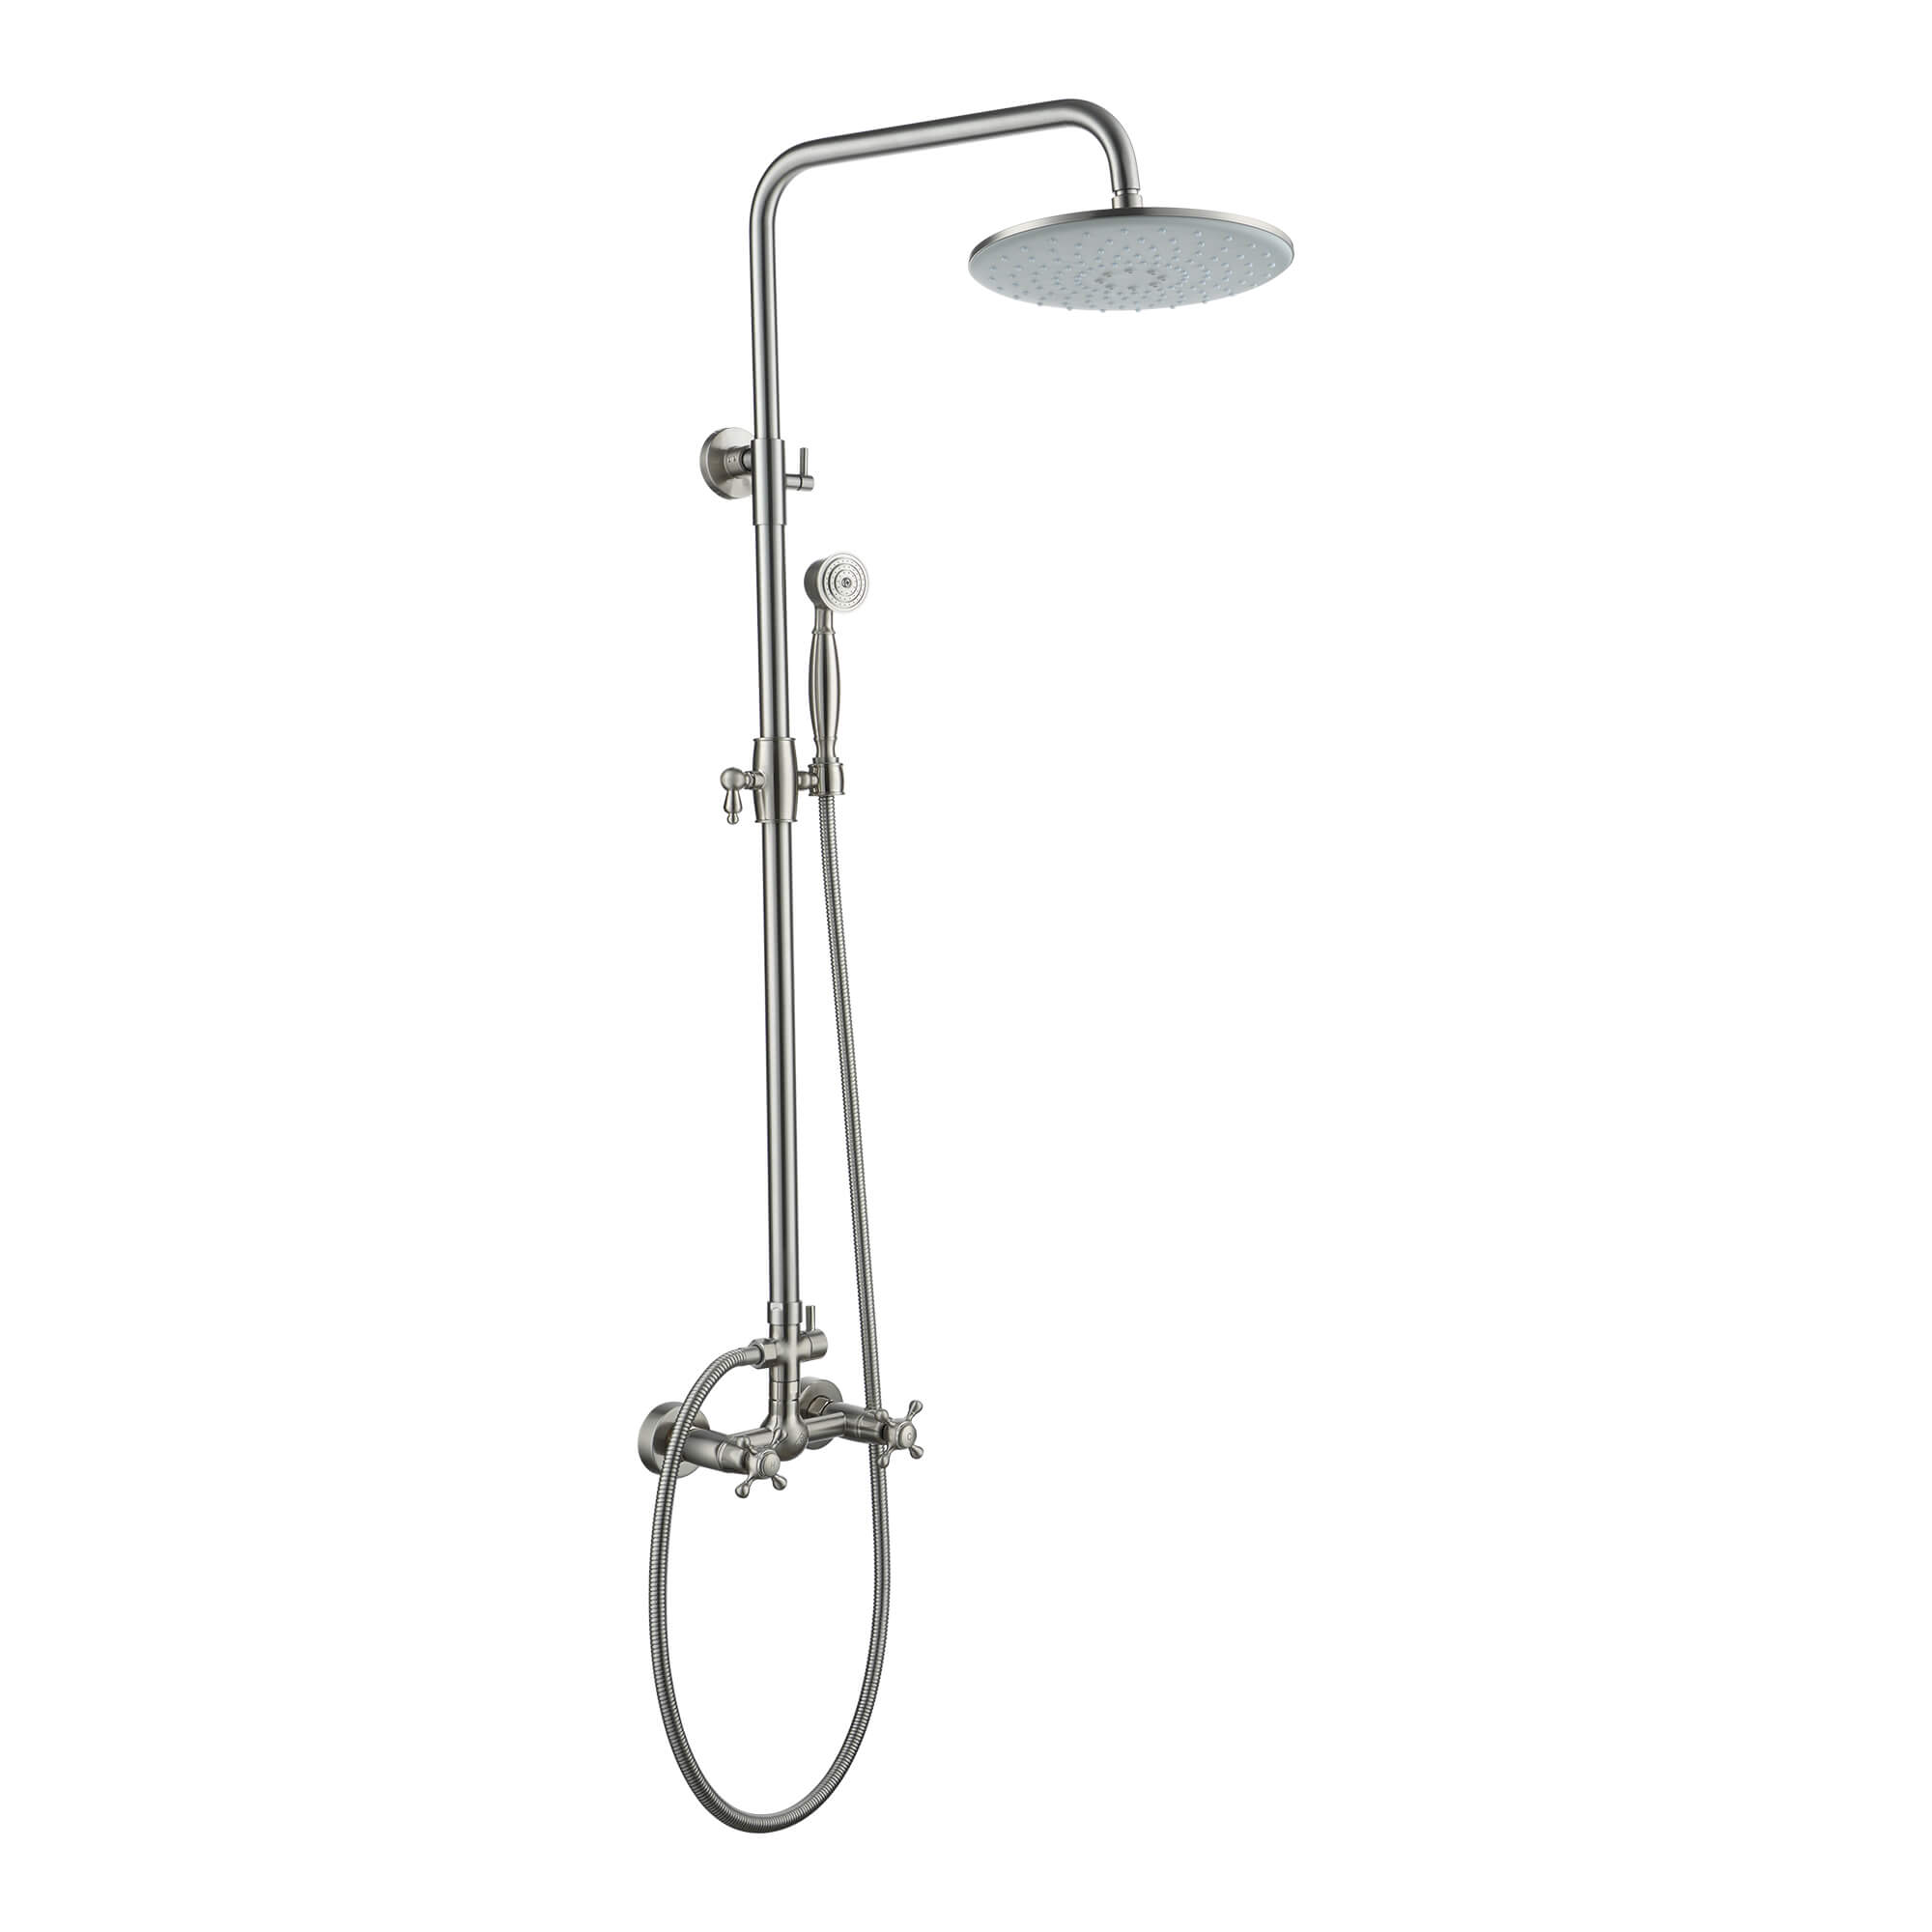 CASAINC Exposed Pipe 10-in Rainfall Shower System with Handheld Shower